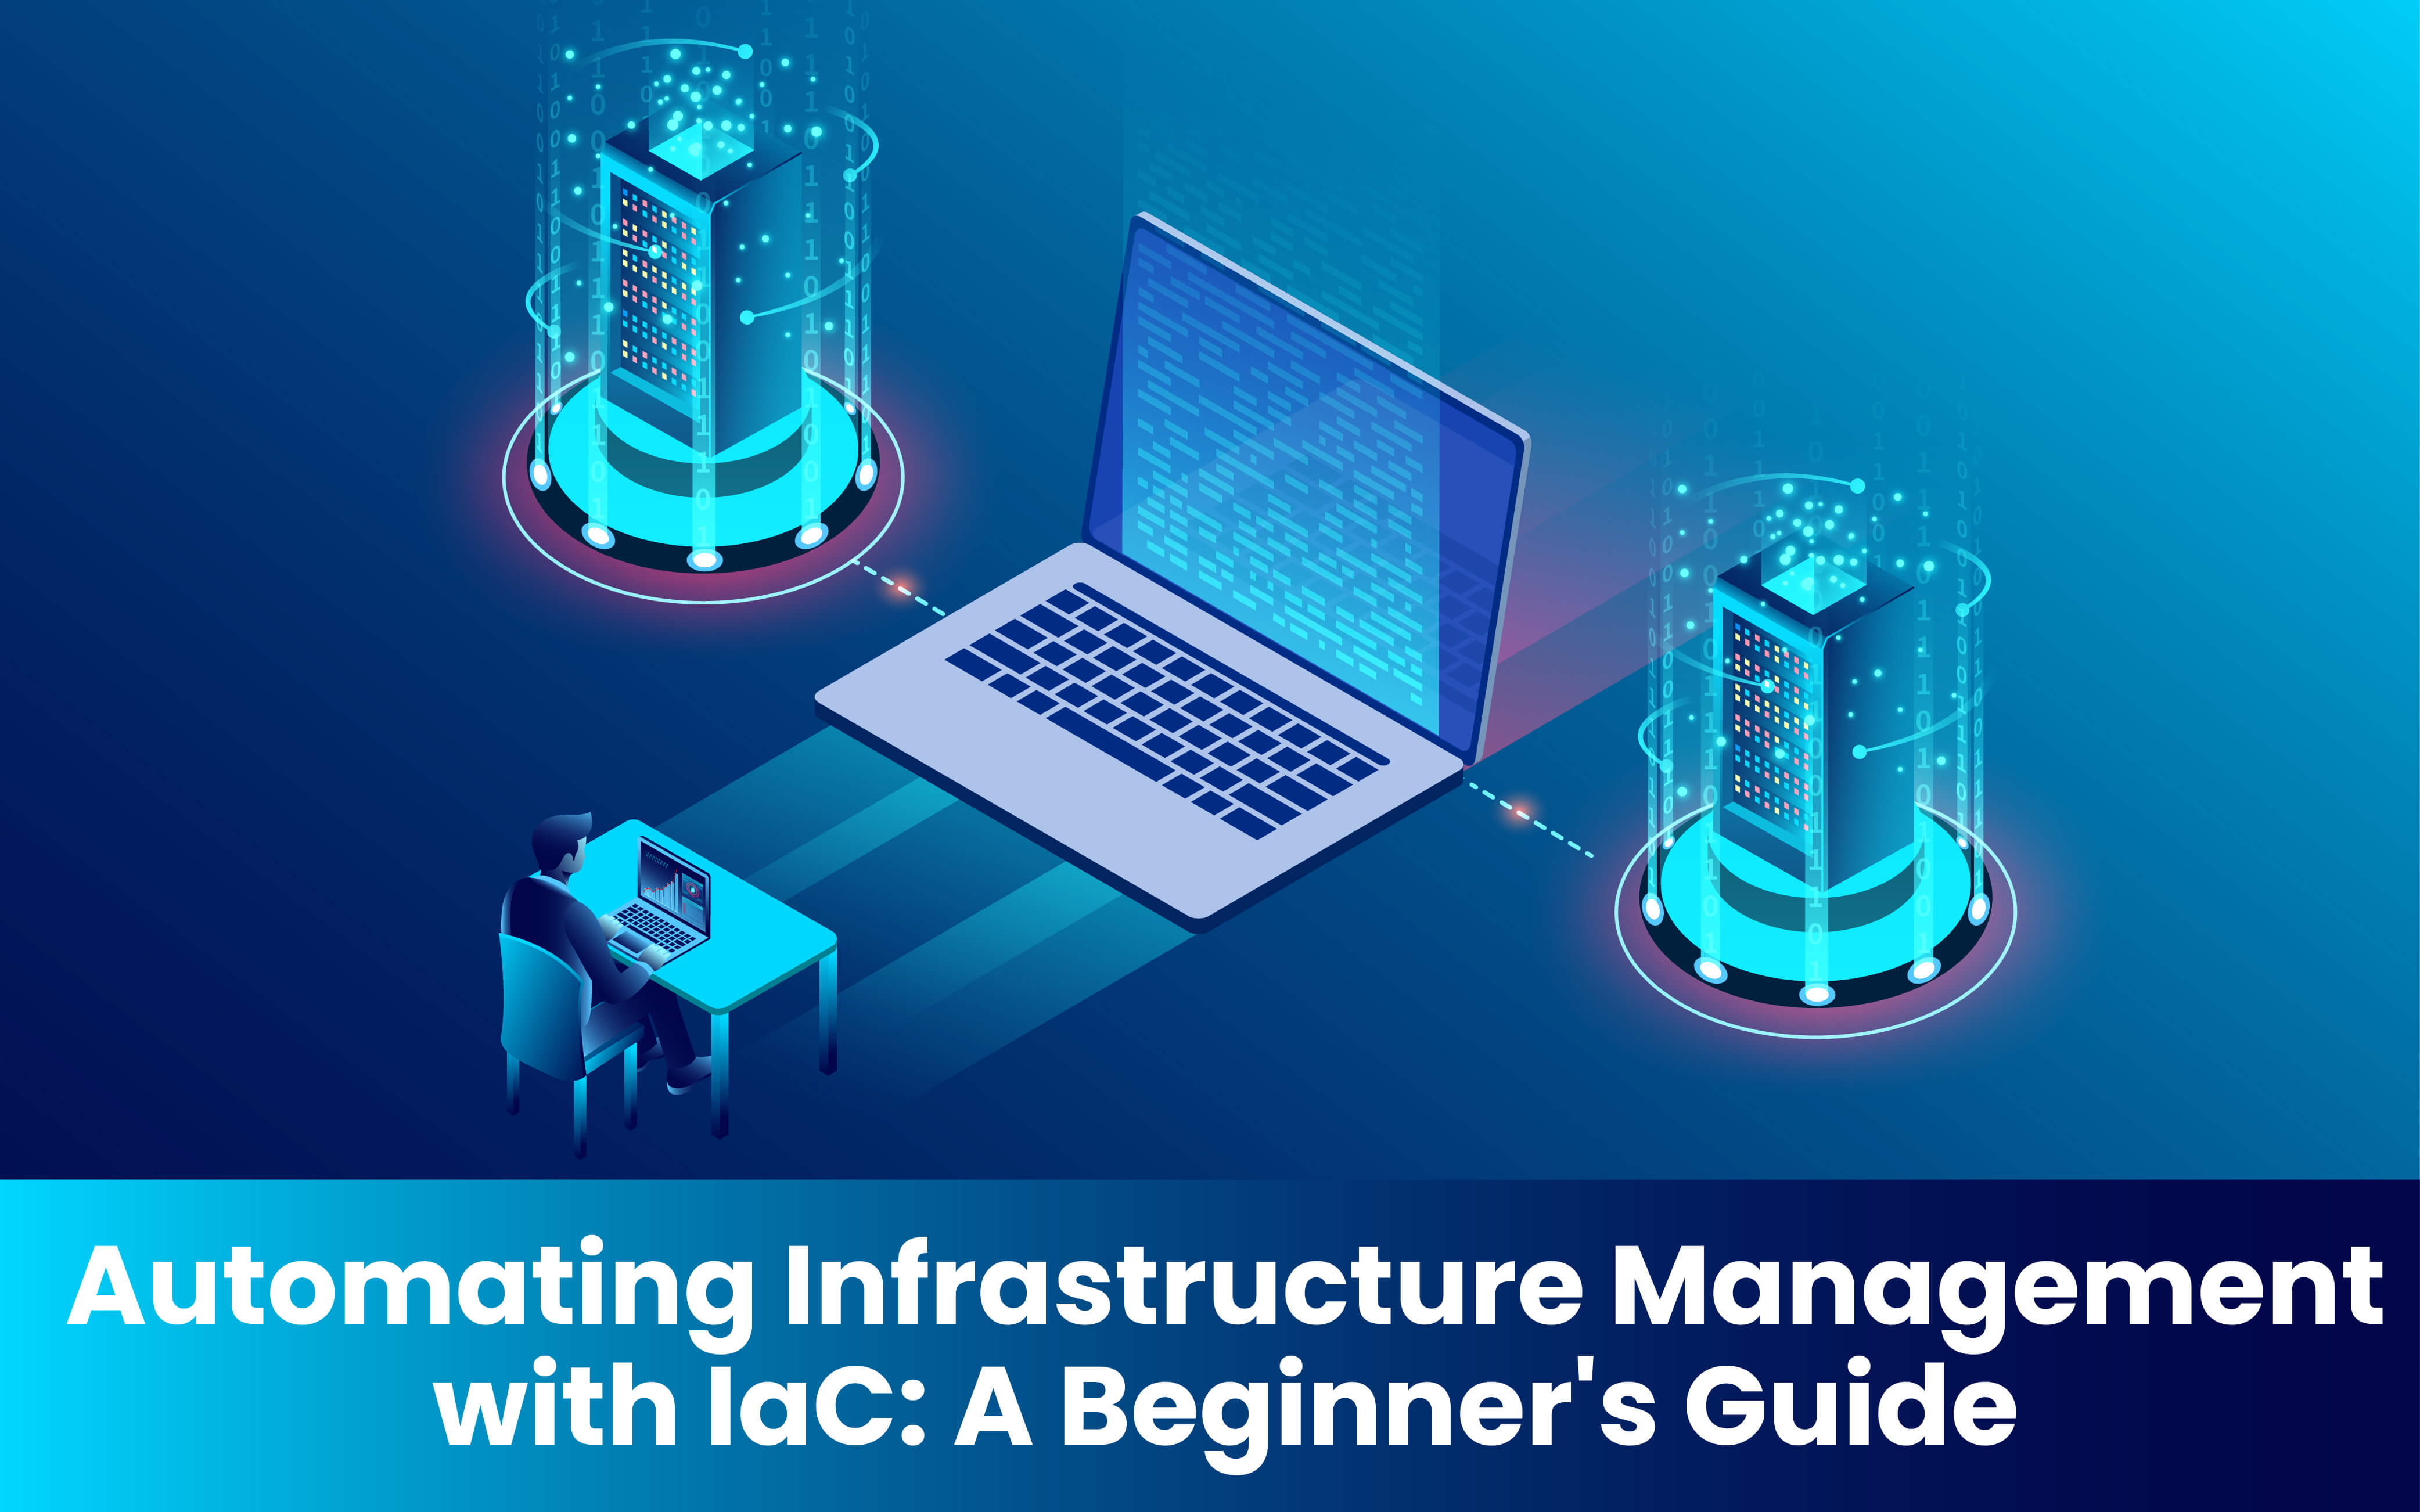 Automating Infrastructure Management with IaC: A Beginner’s Guide